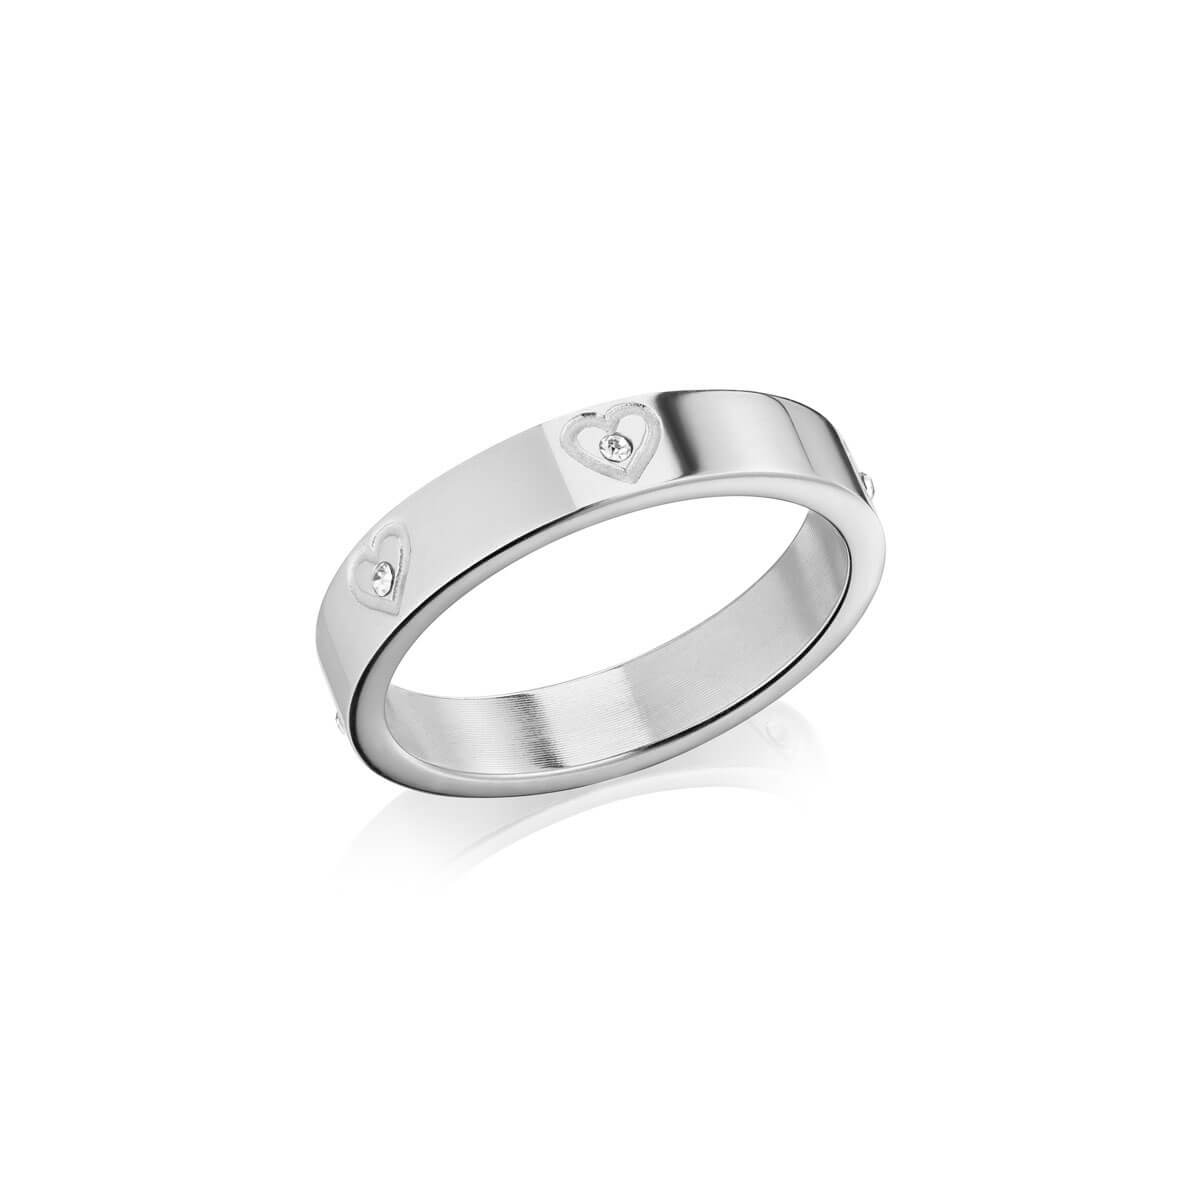 Empreinte Ring, White Gold and Diamonds - Jewelry - Categories